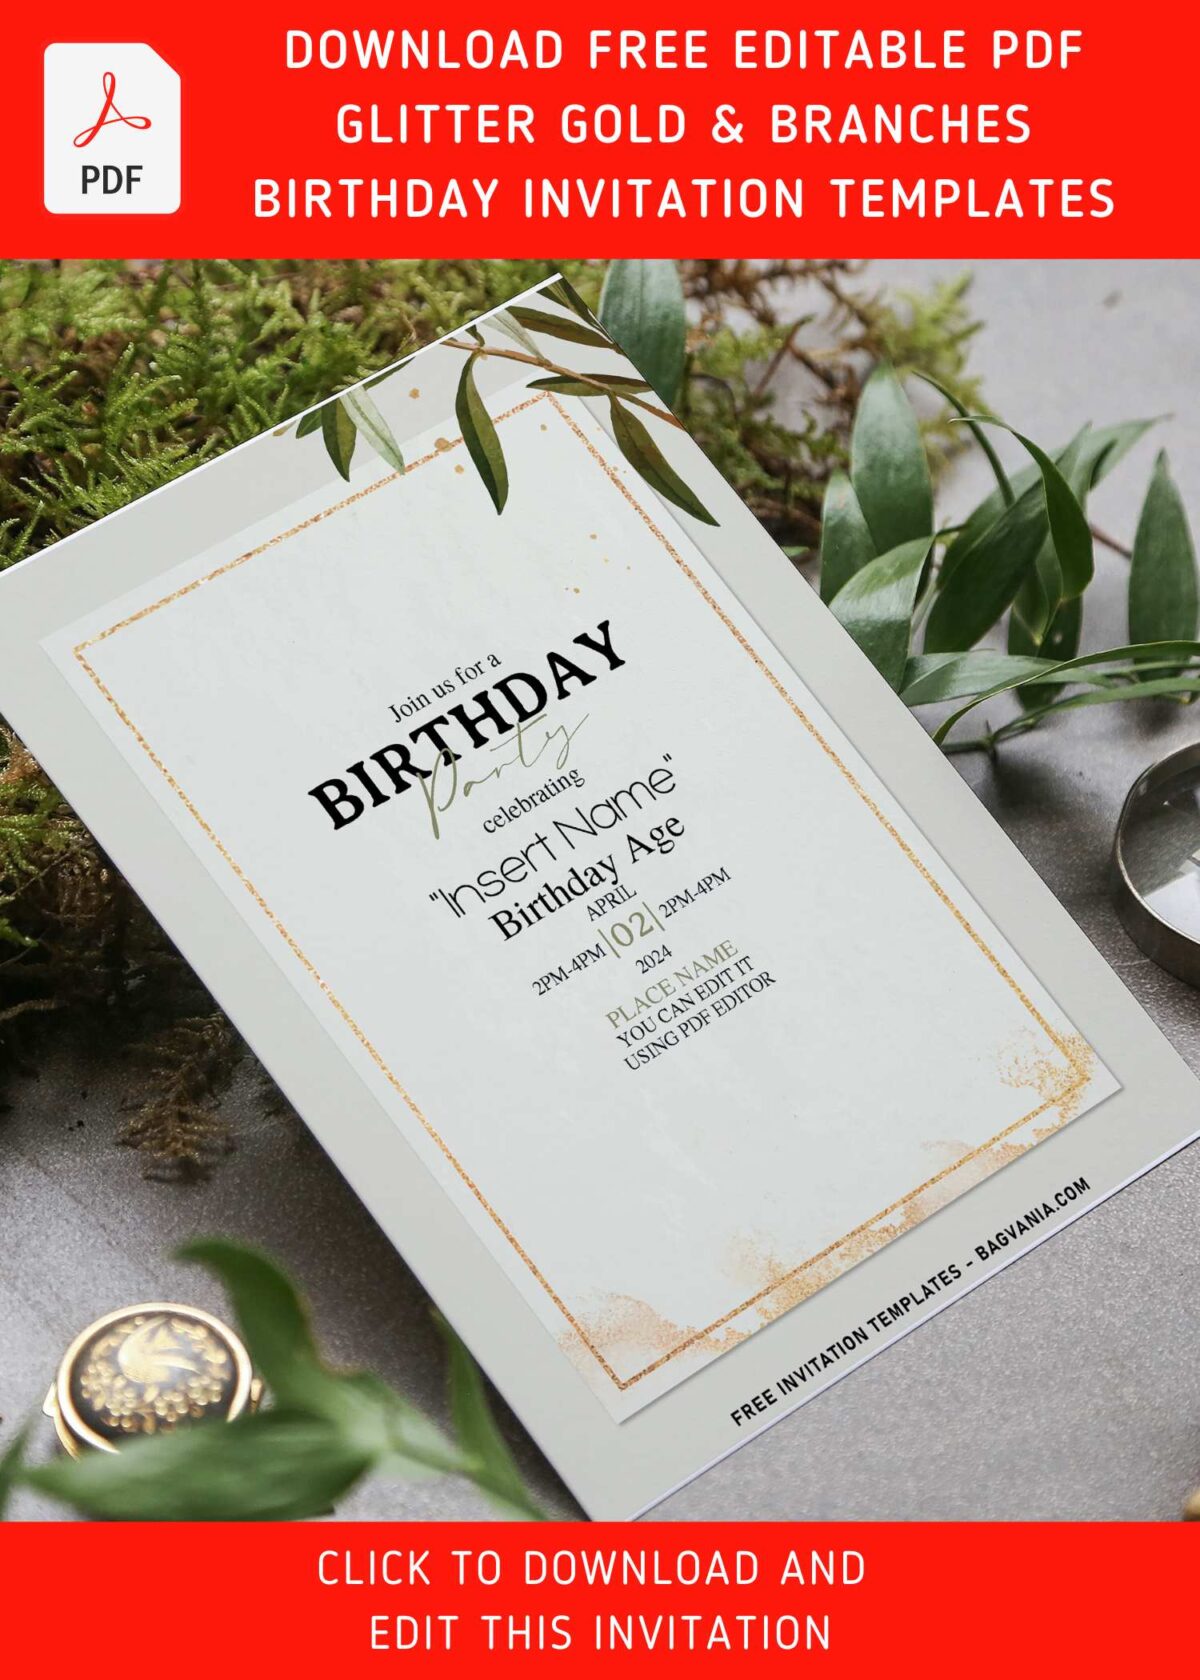 (Free Editable PDF) Glitter Gold Frame & Branches Birthday Invitation Templates with watercolor willow vines